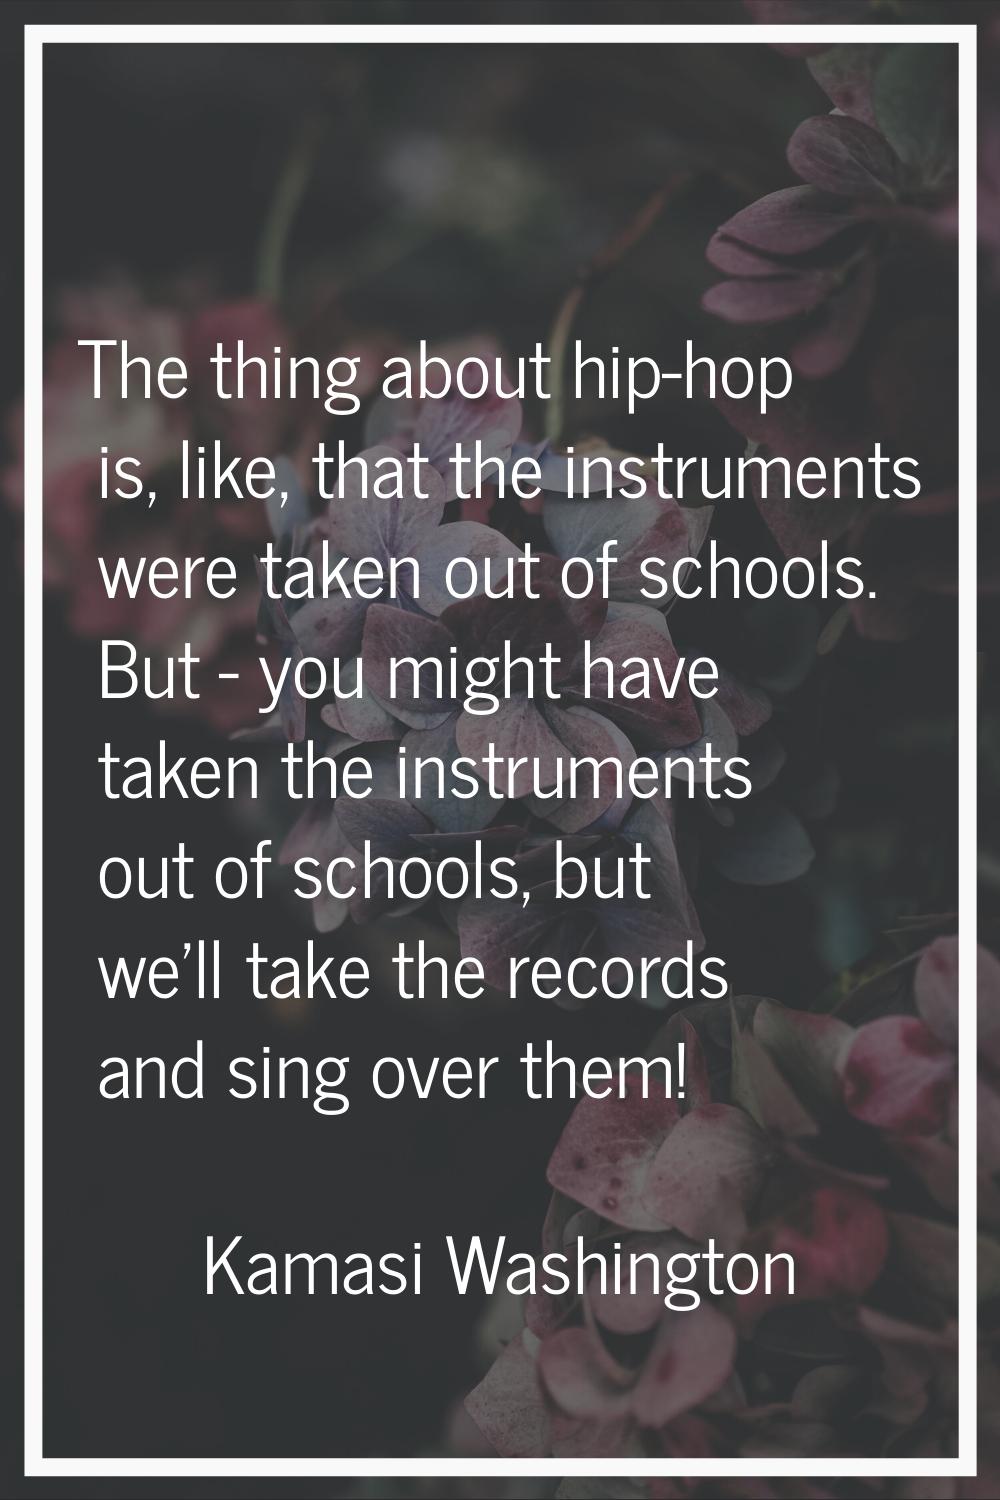 The thing about hip-hop is, like, that the instruments were taken out of schools. But - you might h